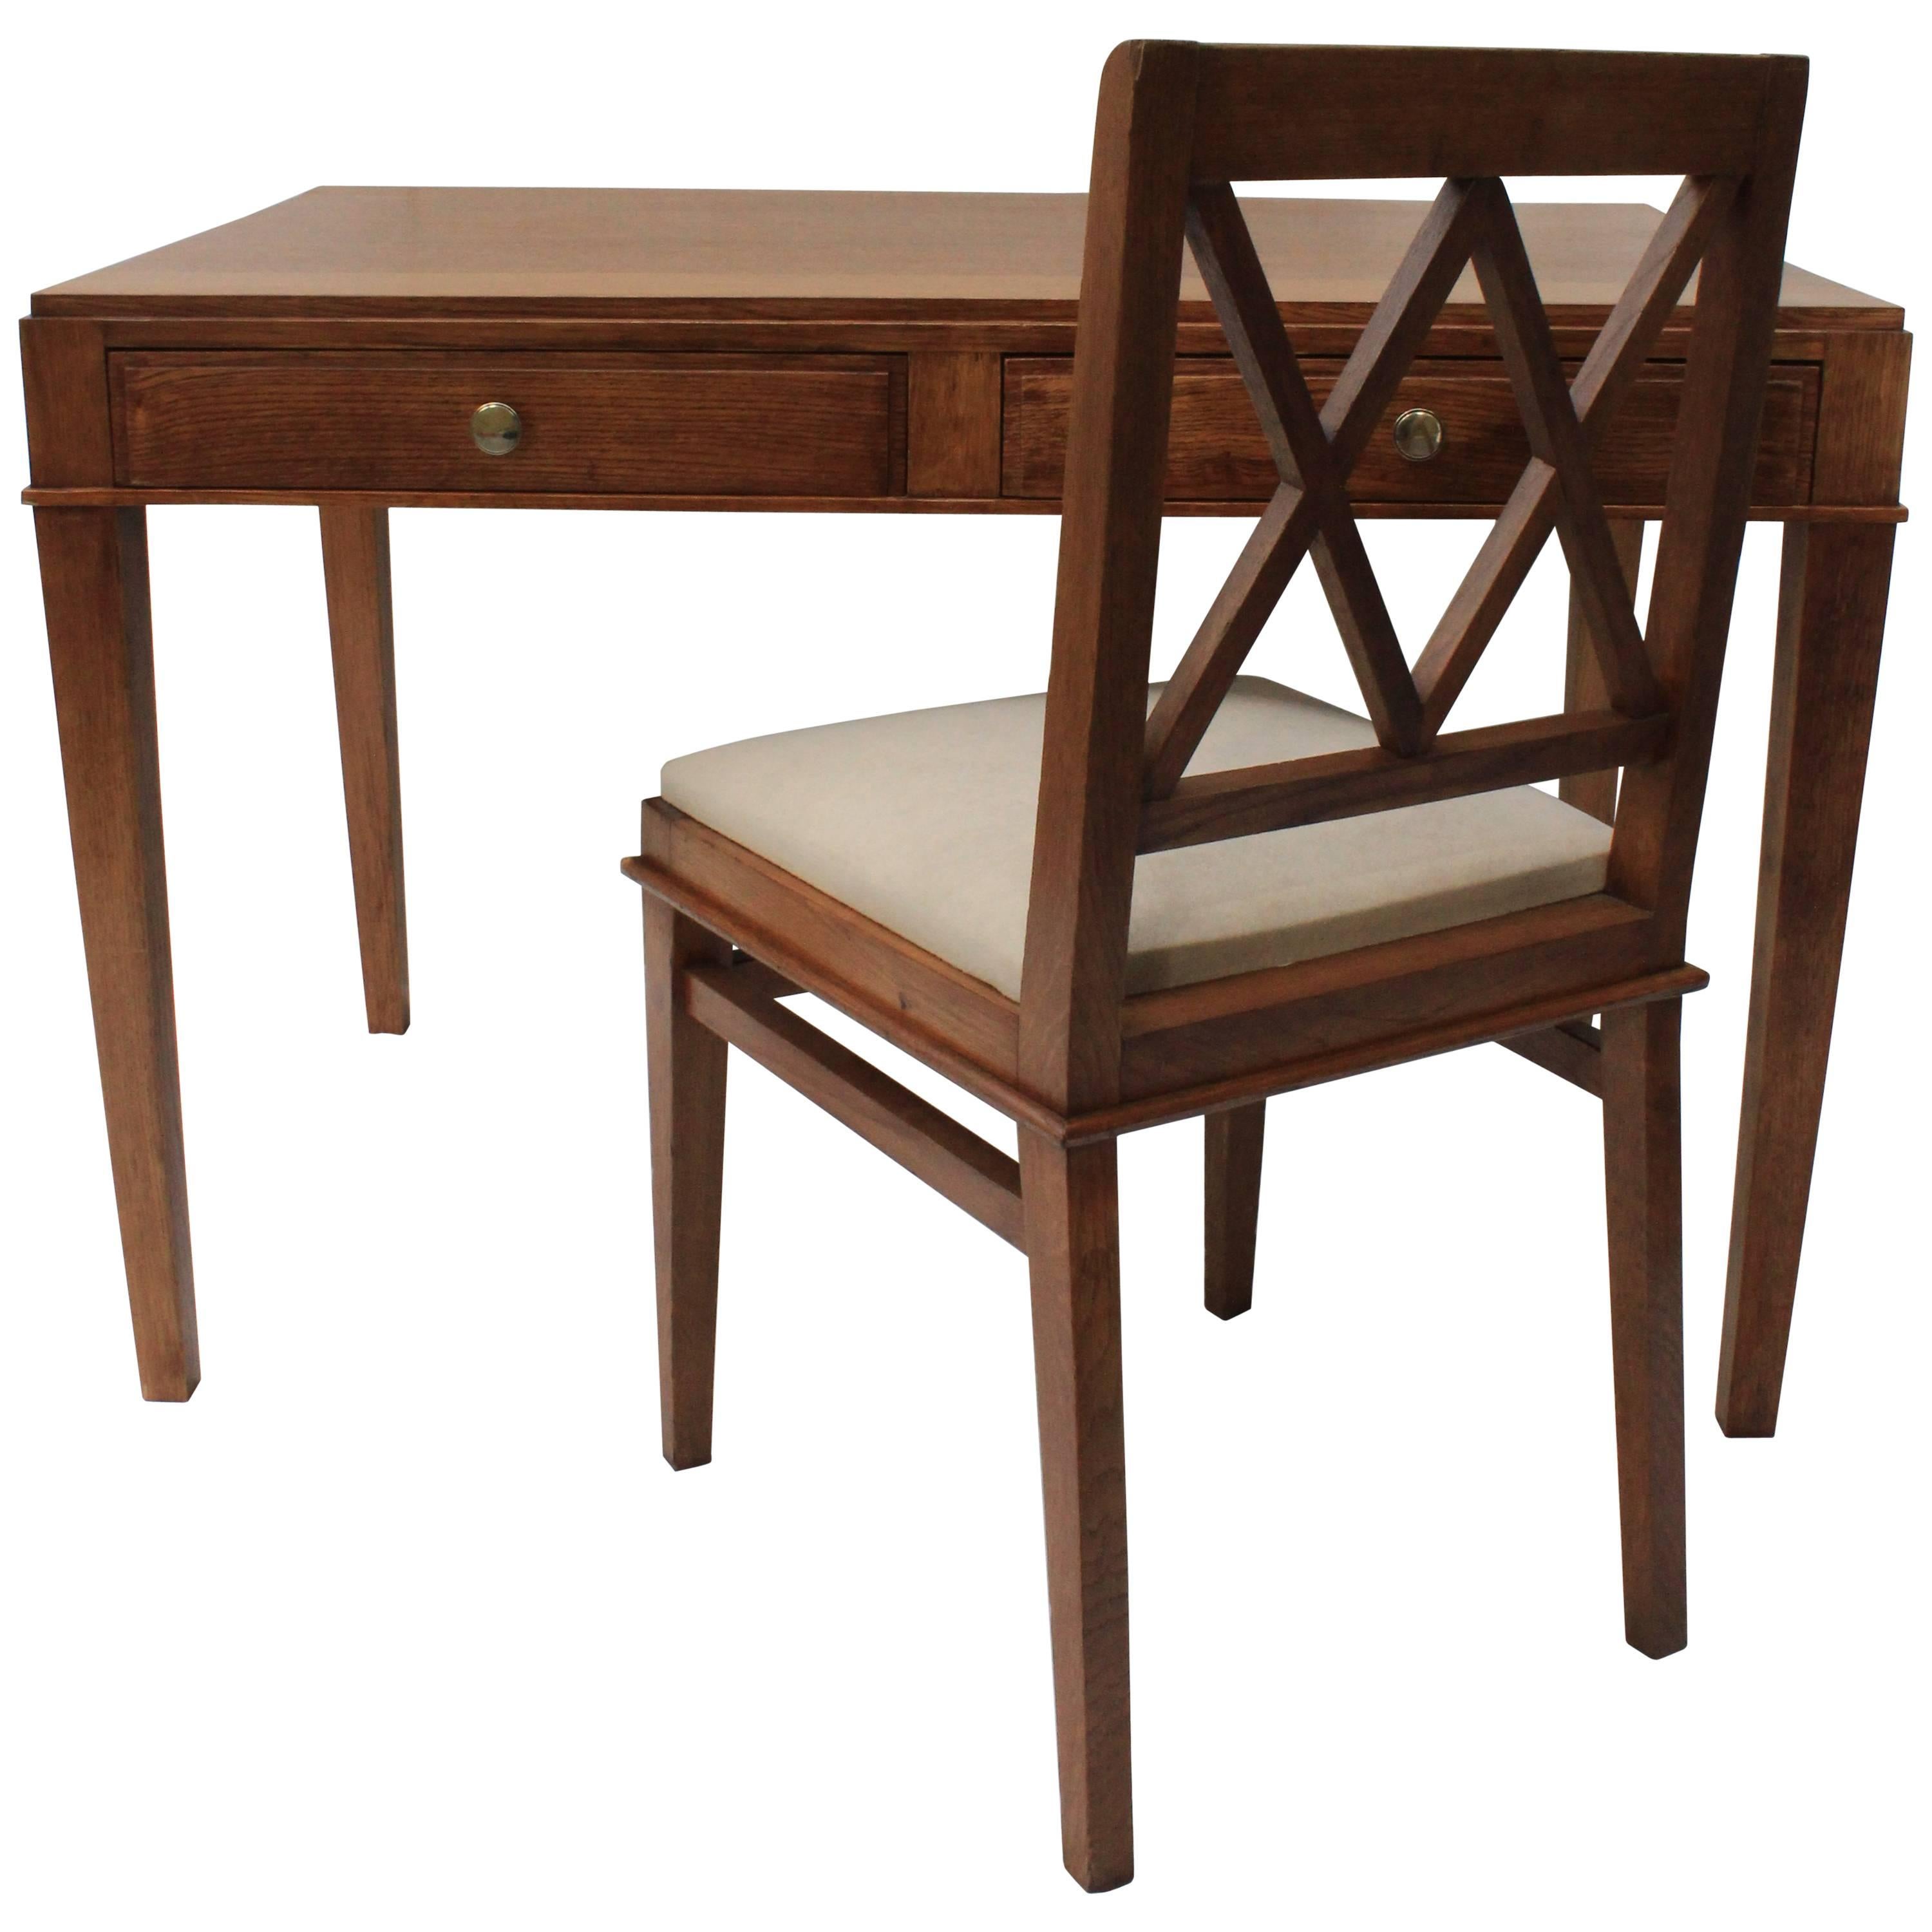 Jacques Adnet Oak Desk and Chair